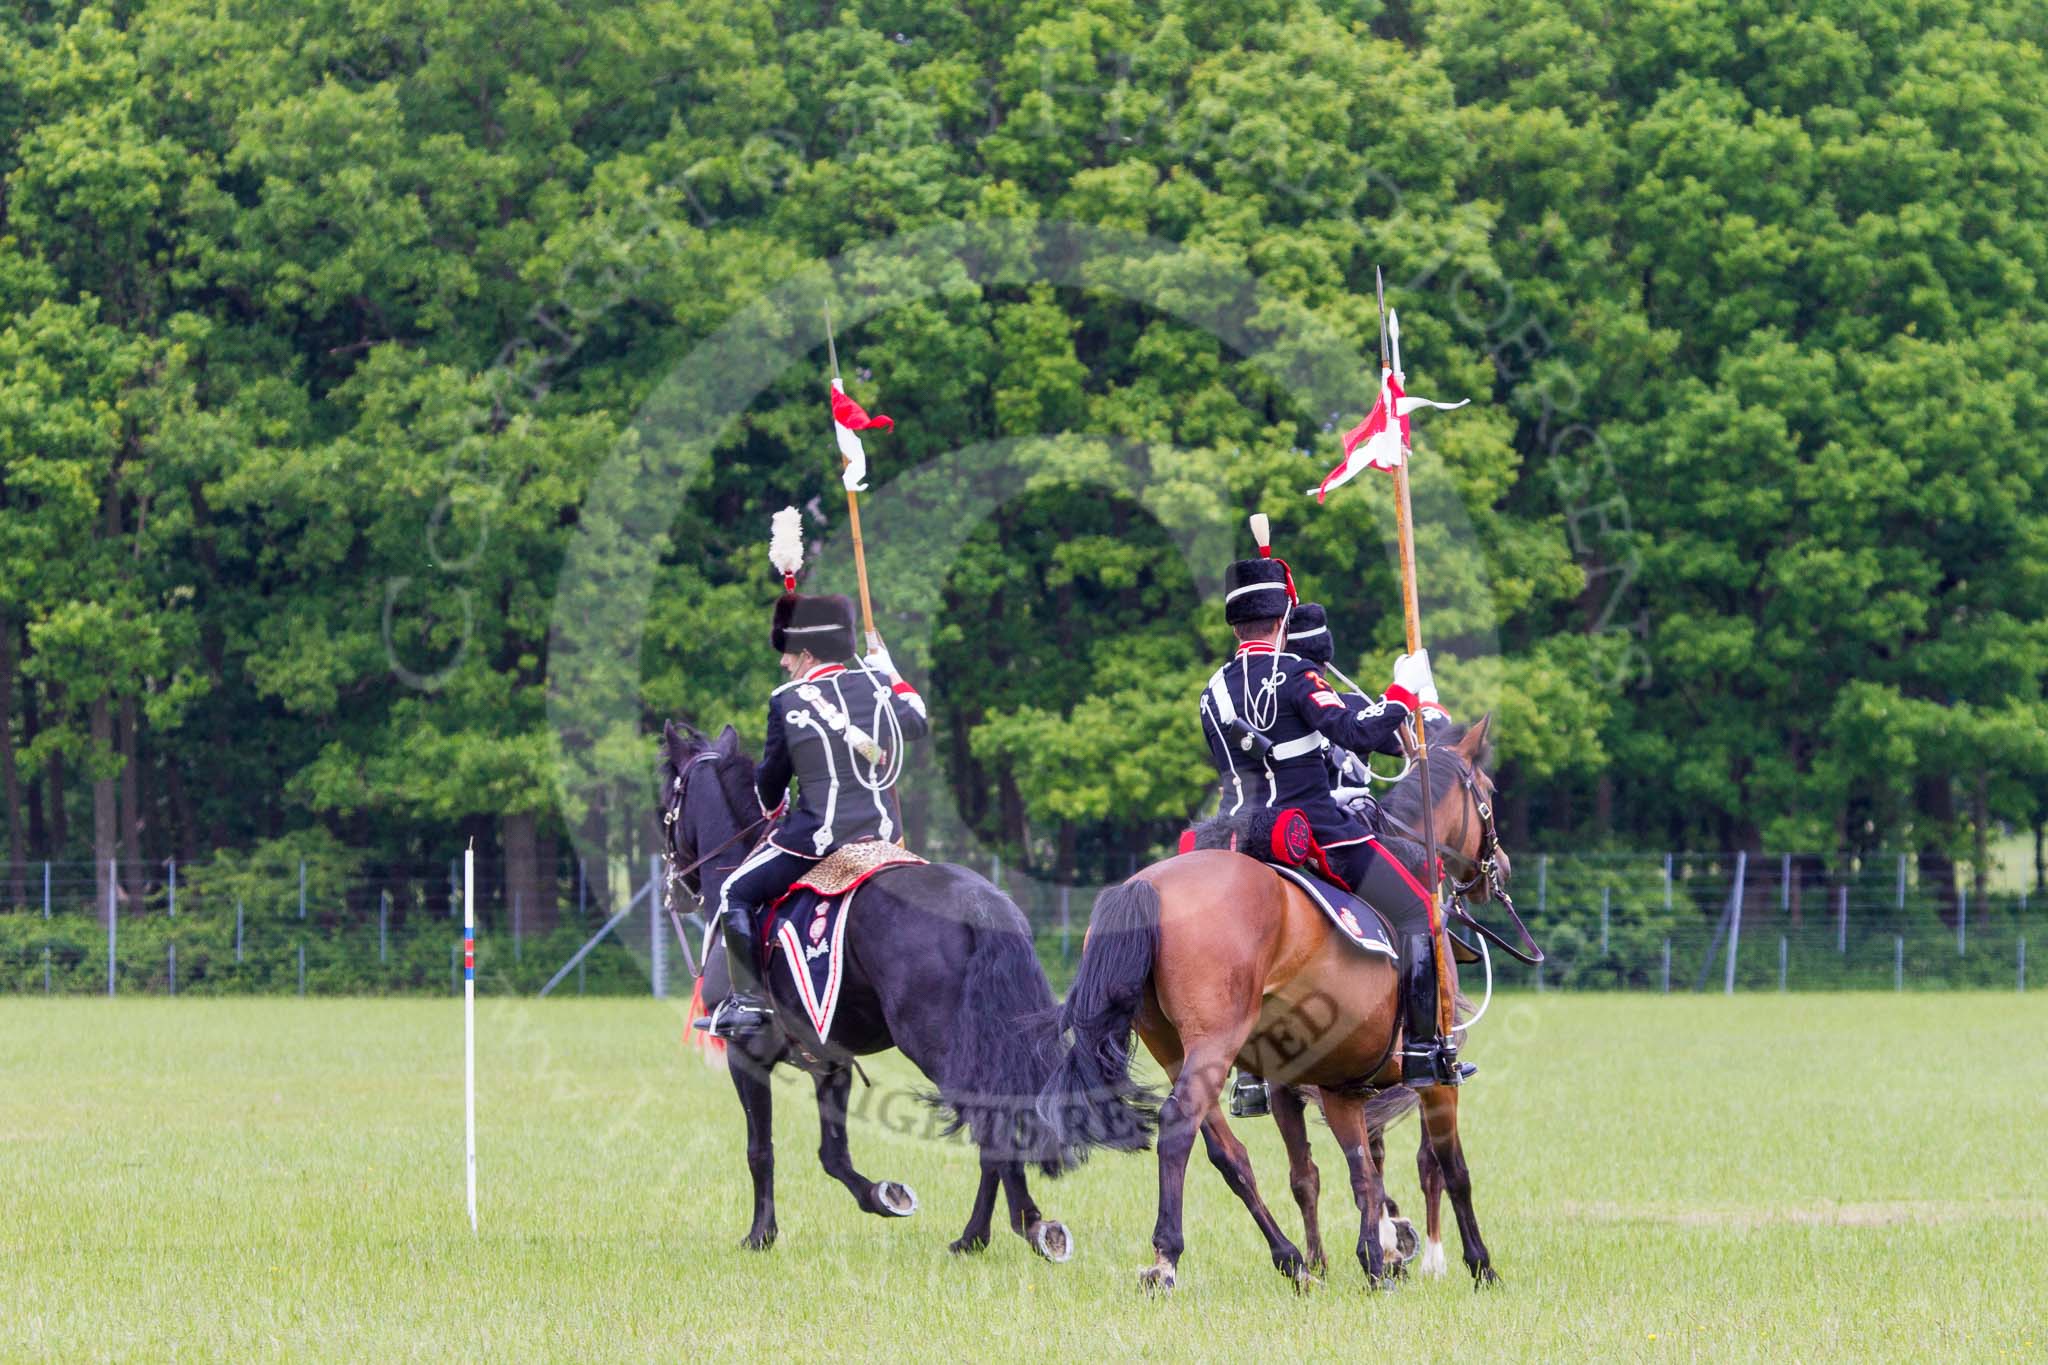 The Light Cavalry HAC Annual Review and Inspection 2013.
Windsor Great Park Review Ground,
Windsor,
Berkshire,
United Kingdom,
on 09 June 2013 at 14:33, image #537